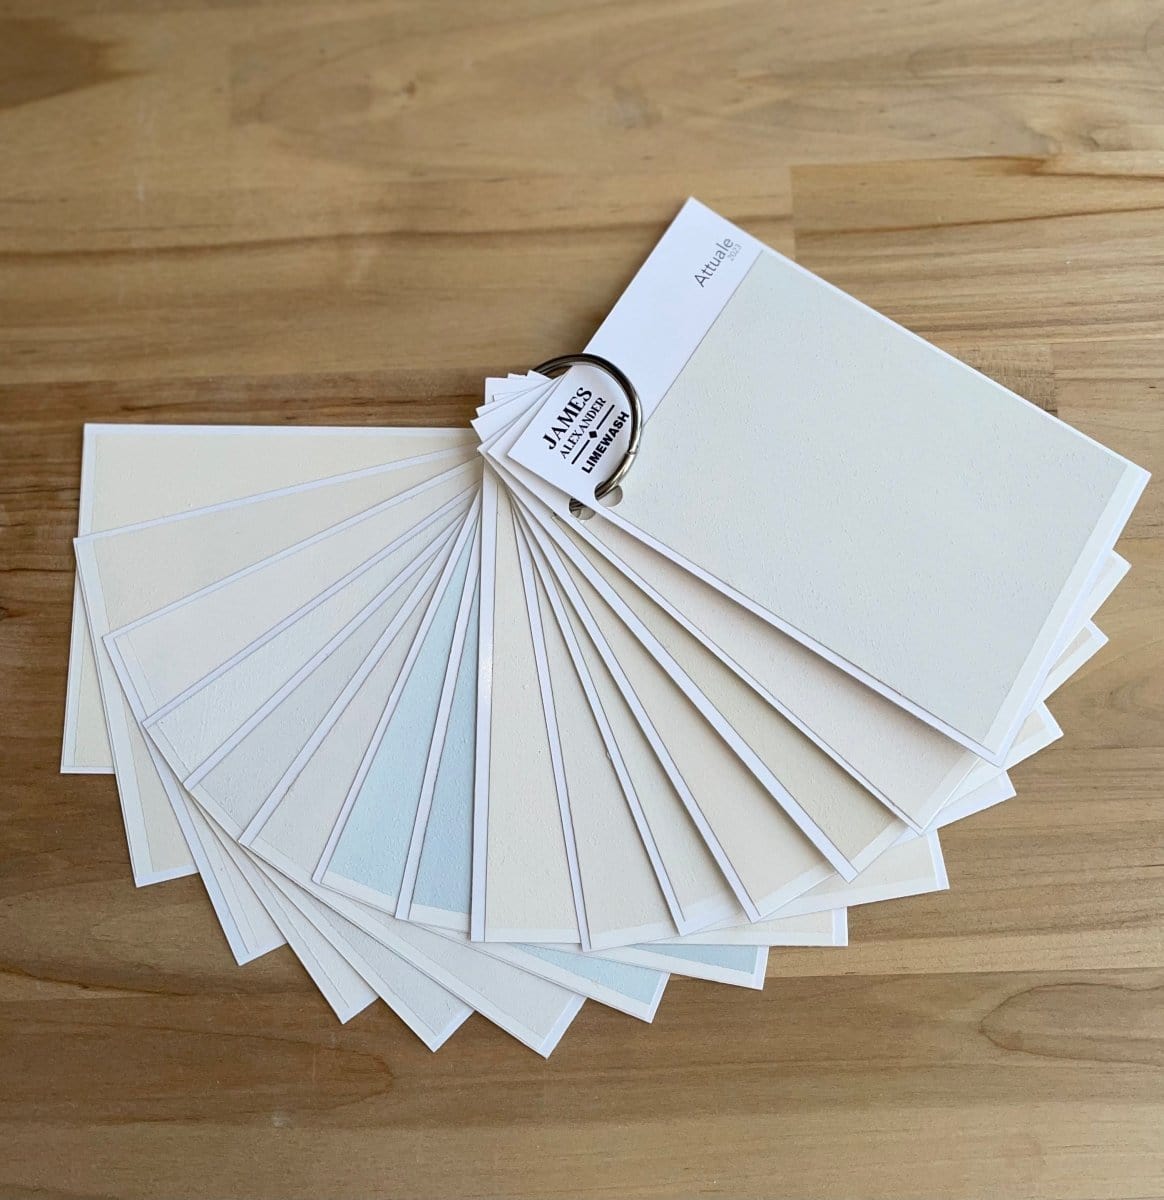 15 Light & Airy limewash colors are in this color deck